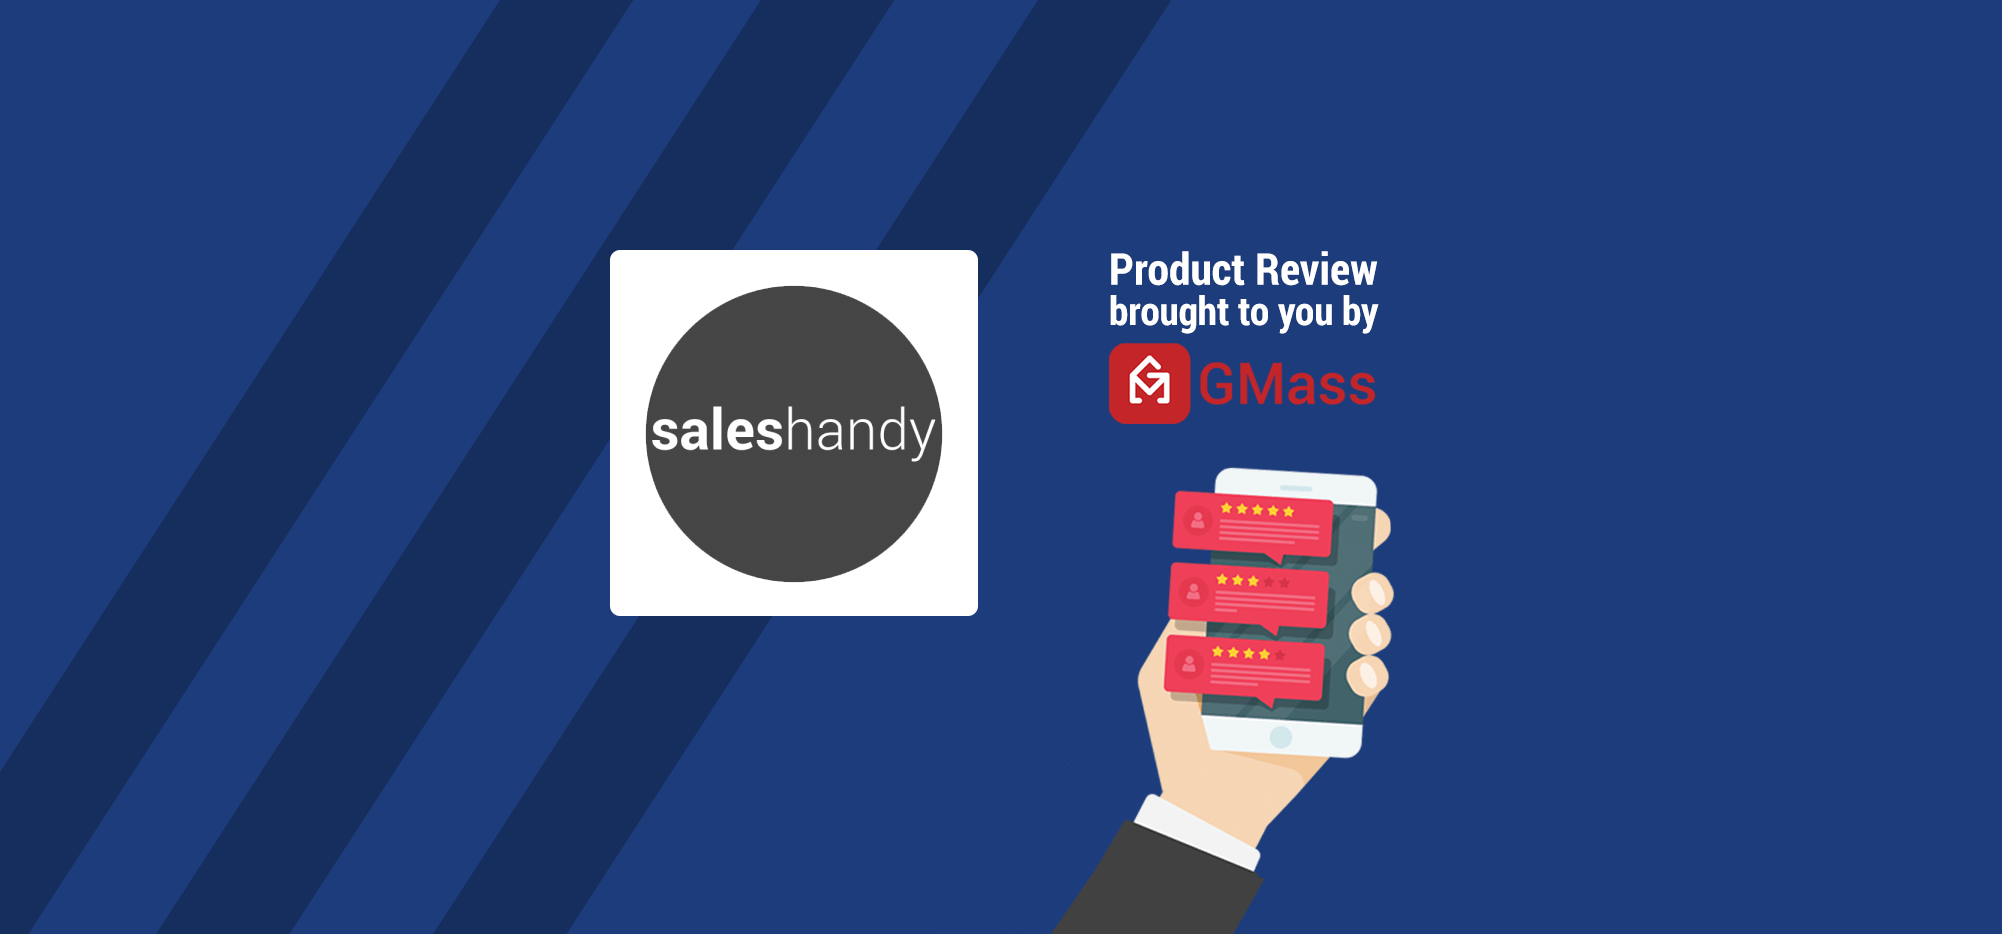 SalesHandy review